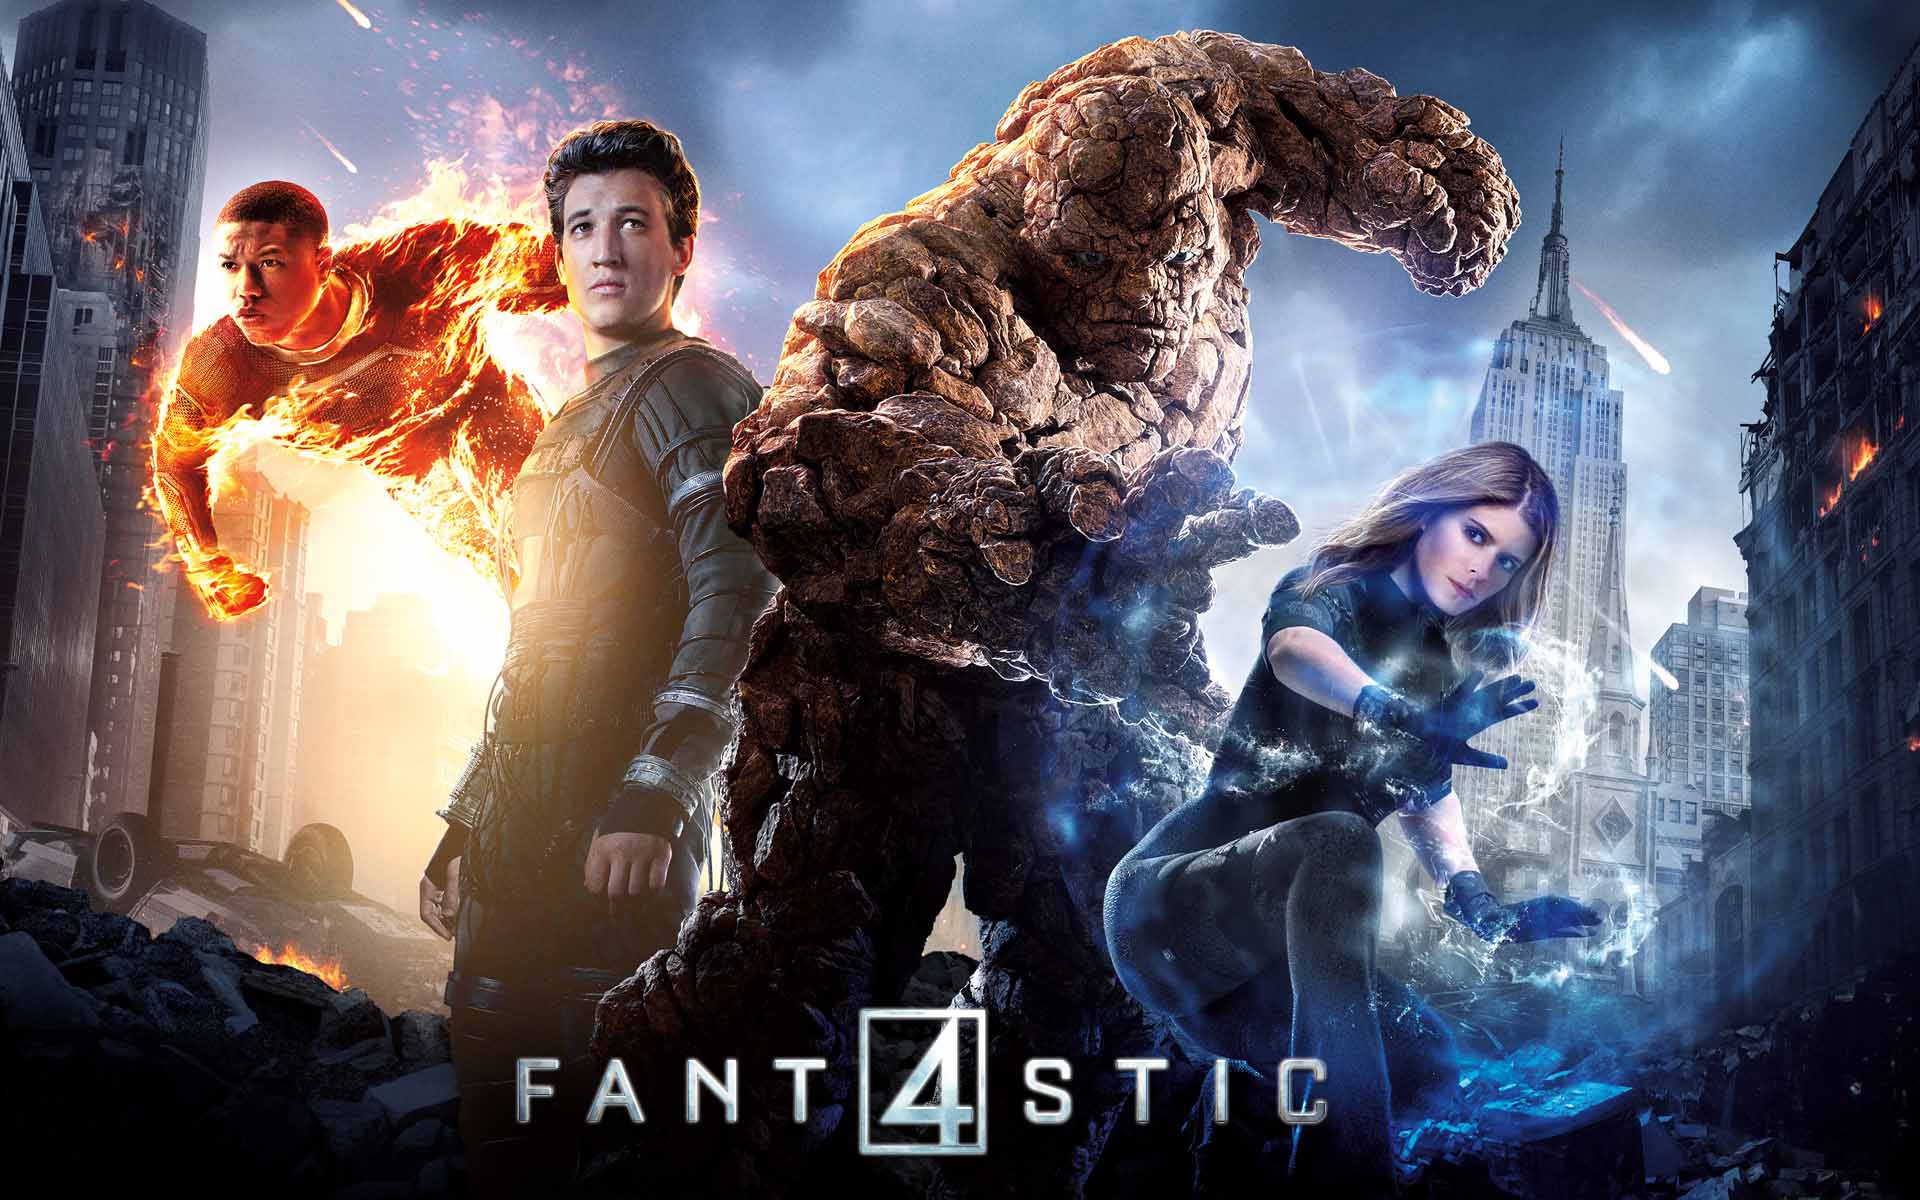  By Stephen Comments Off on Fantastic Four Wallpapers